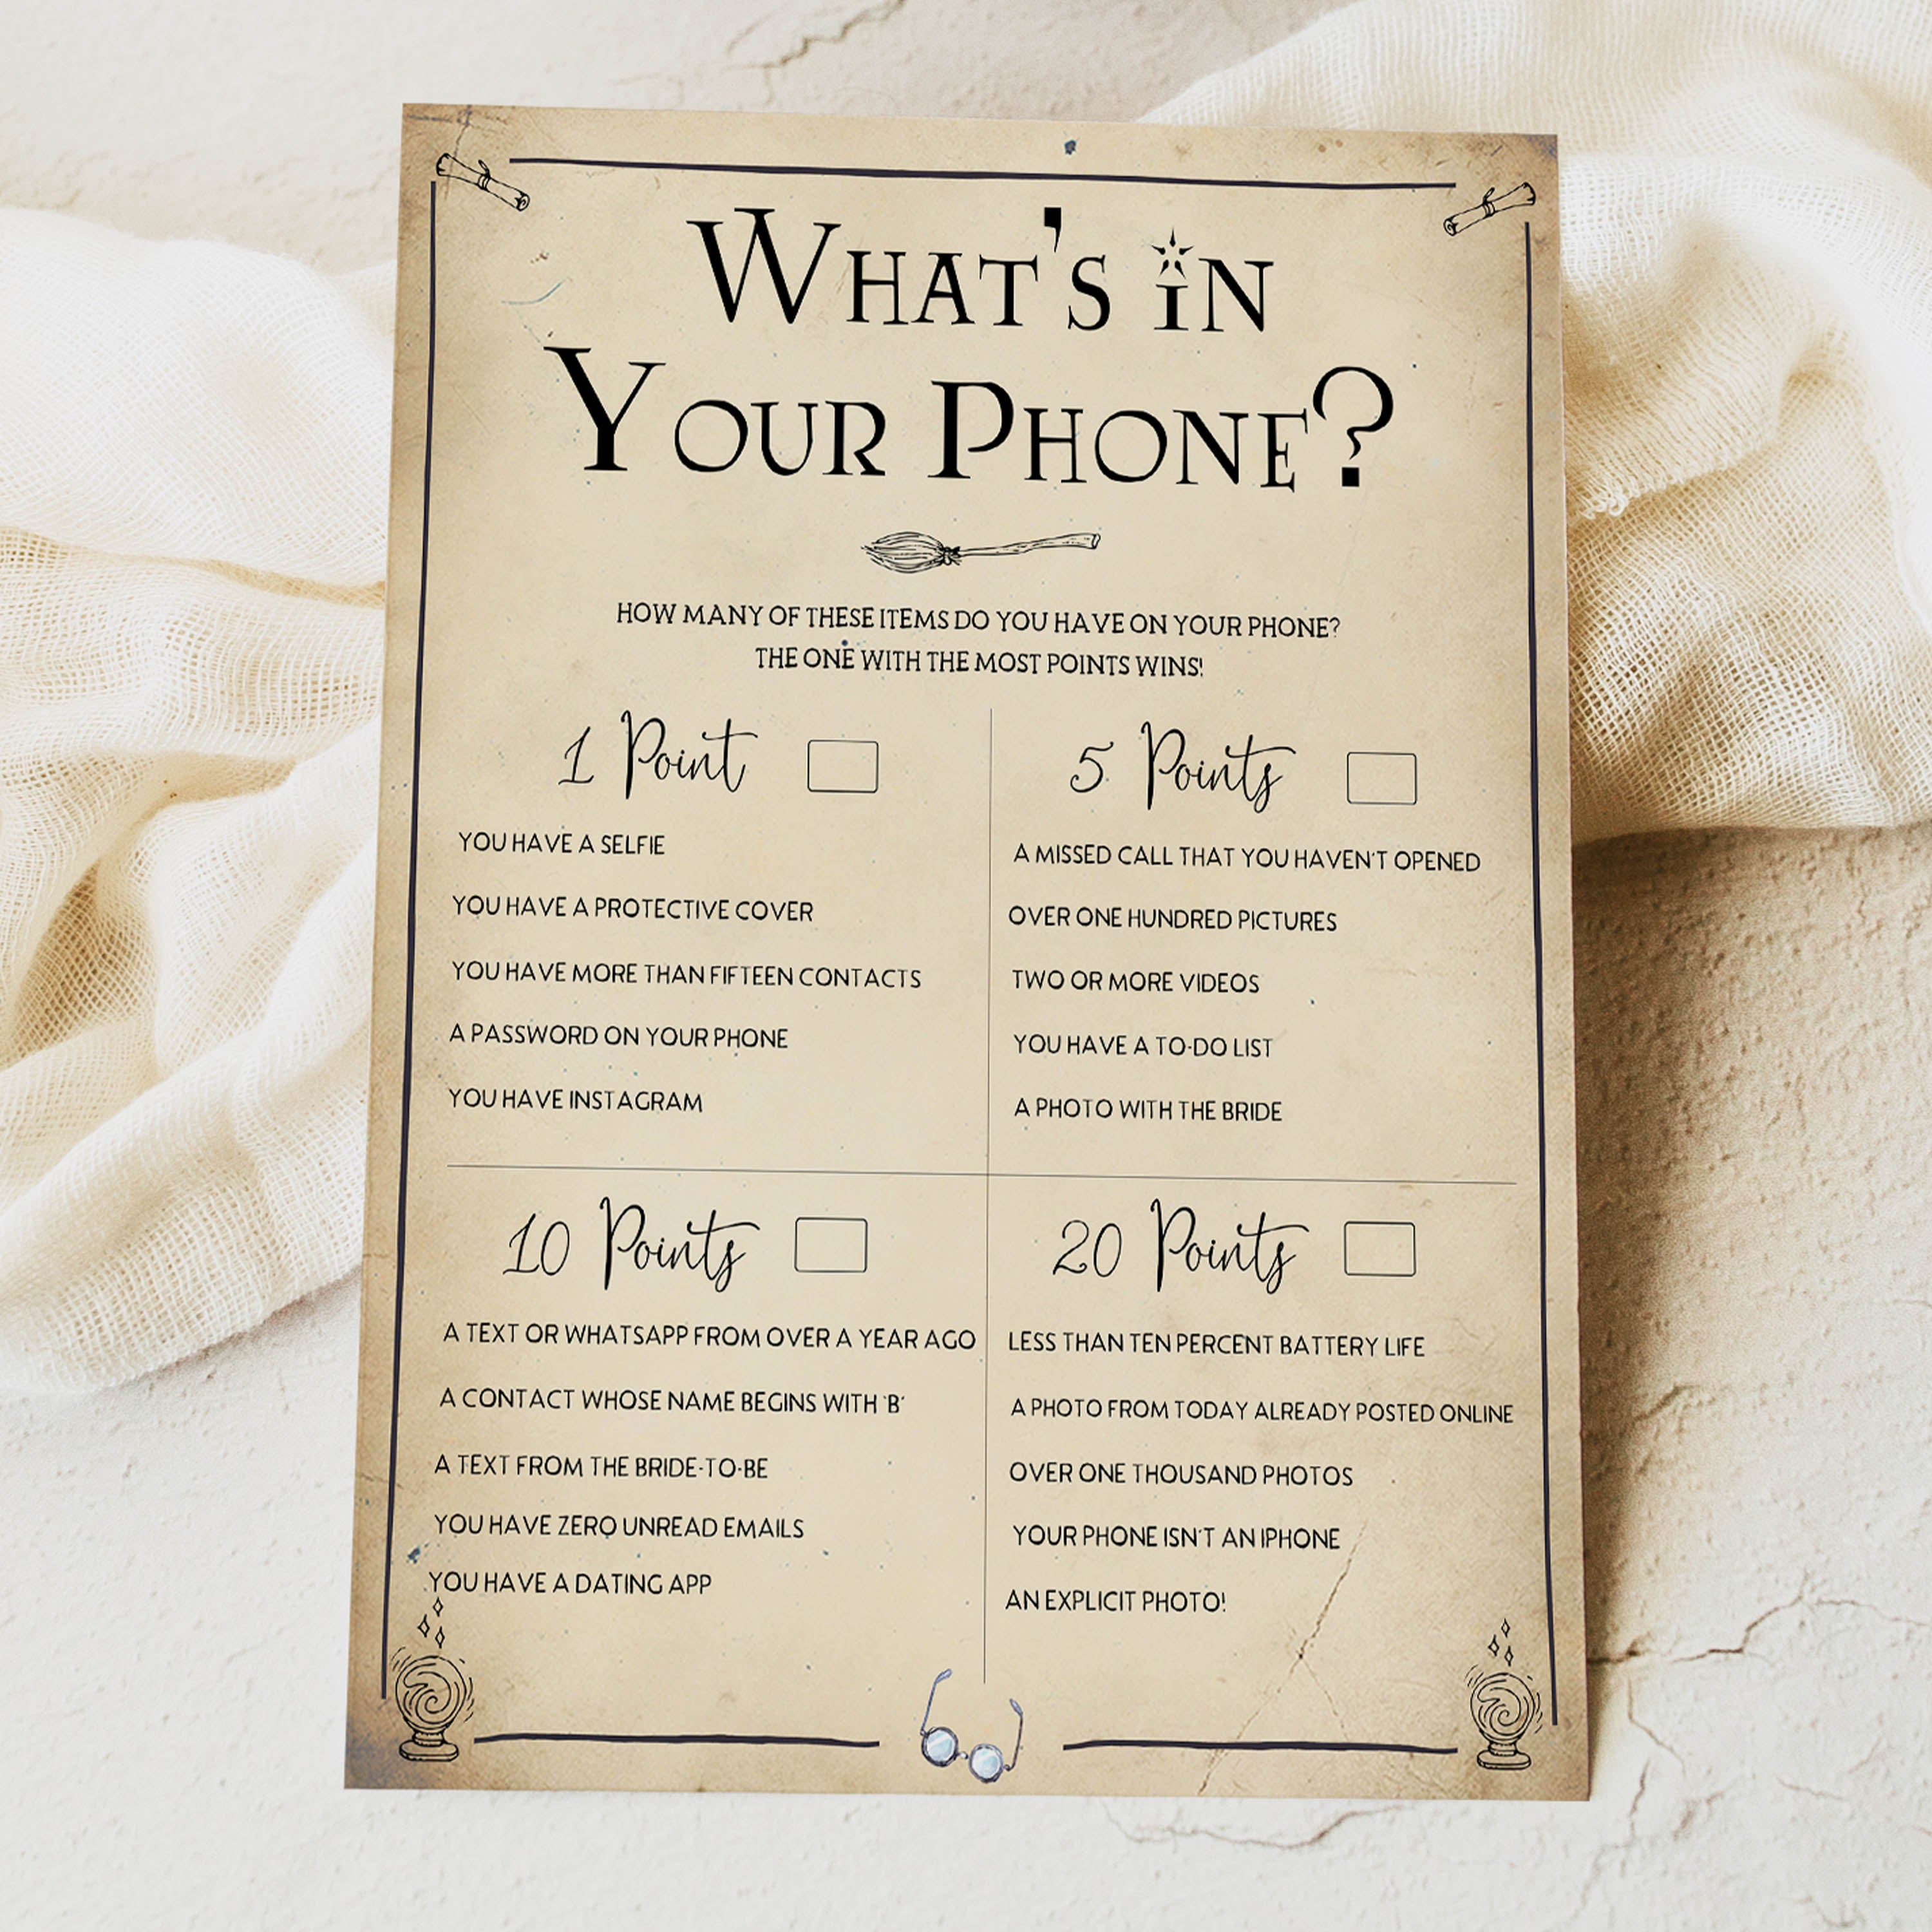 whats in your phone game, Printable bridal shower games, Harry potter bridal shower, Harry Potter bridal shower games, fun bridal shower games, bridal shower game ideas, Harry Potter bridal shower